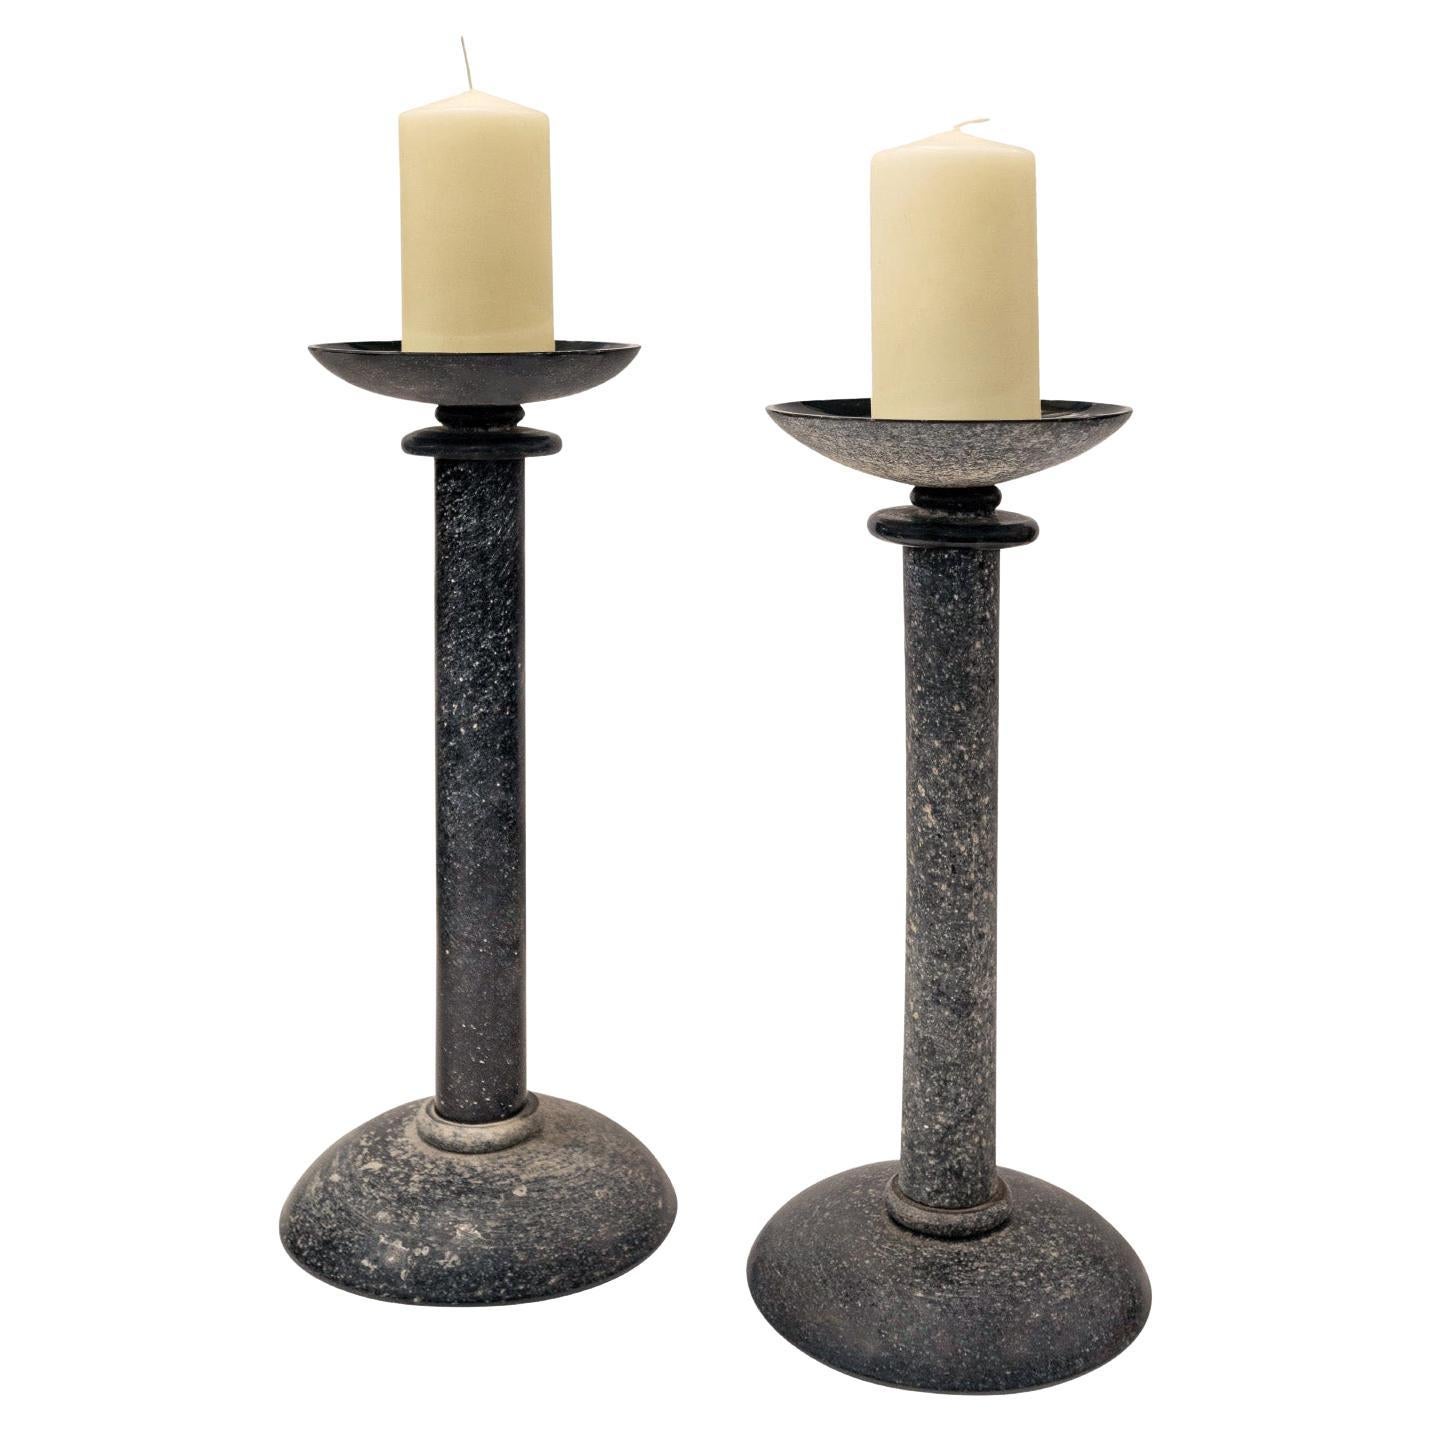 Karl Springer Pair of Hand-Blown Black Glass Candle Holders 1980s (Signed)